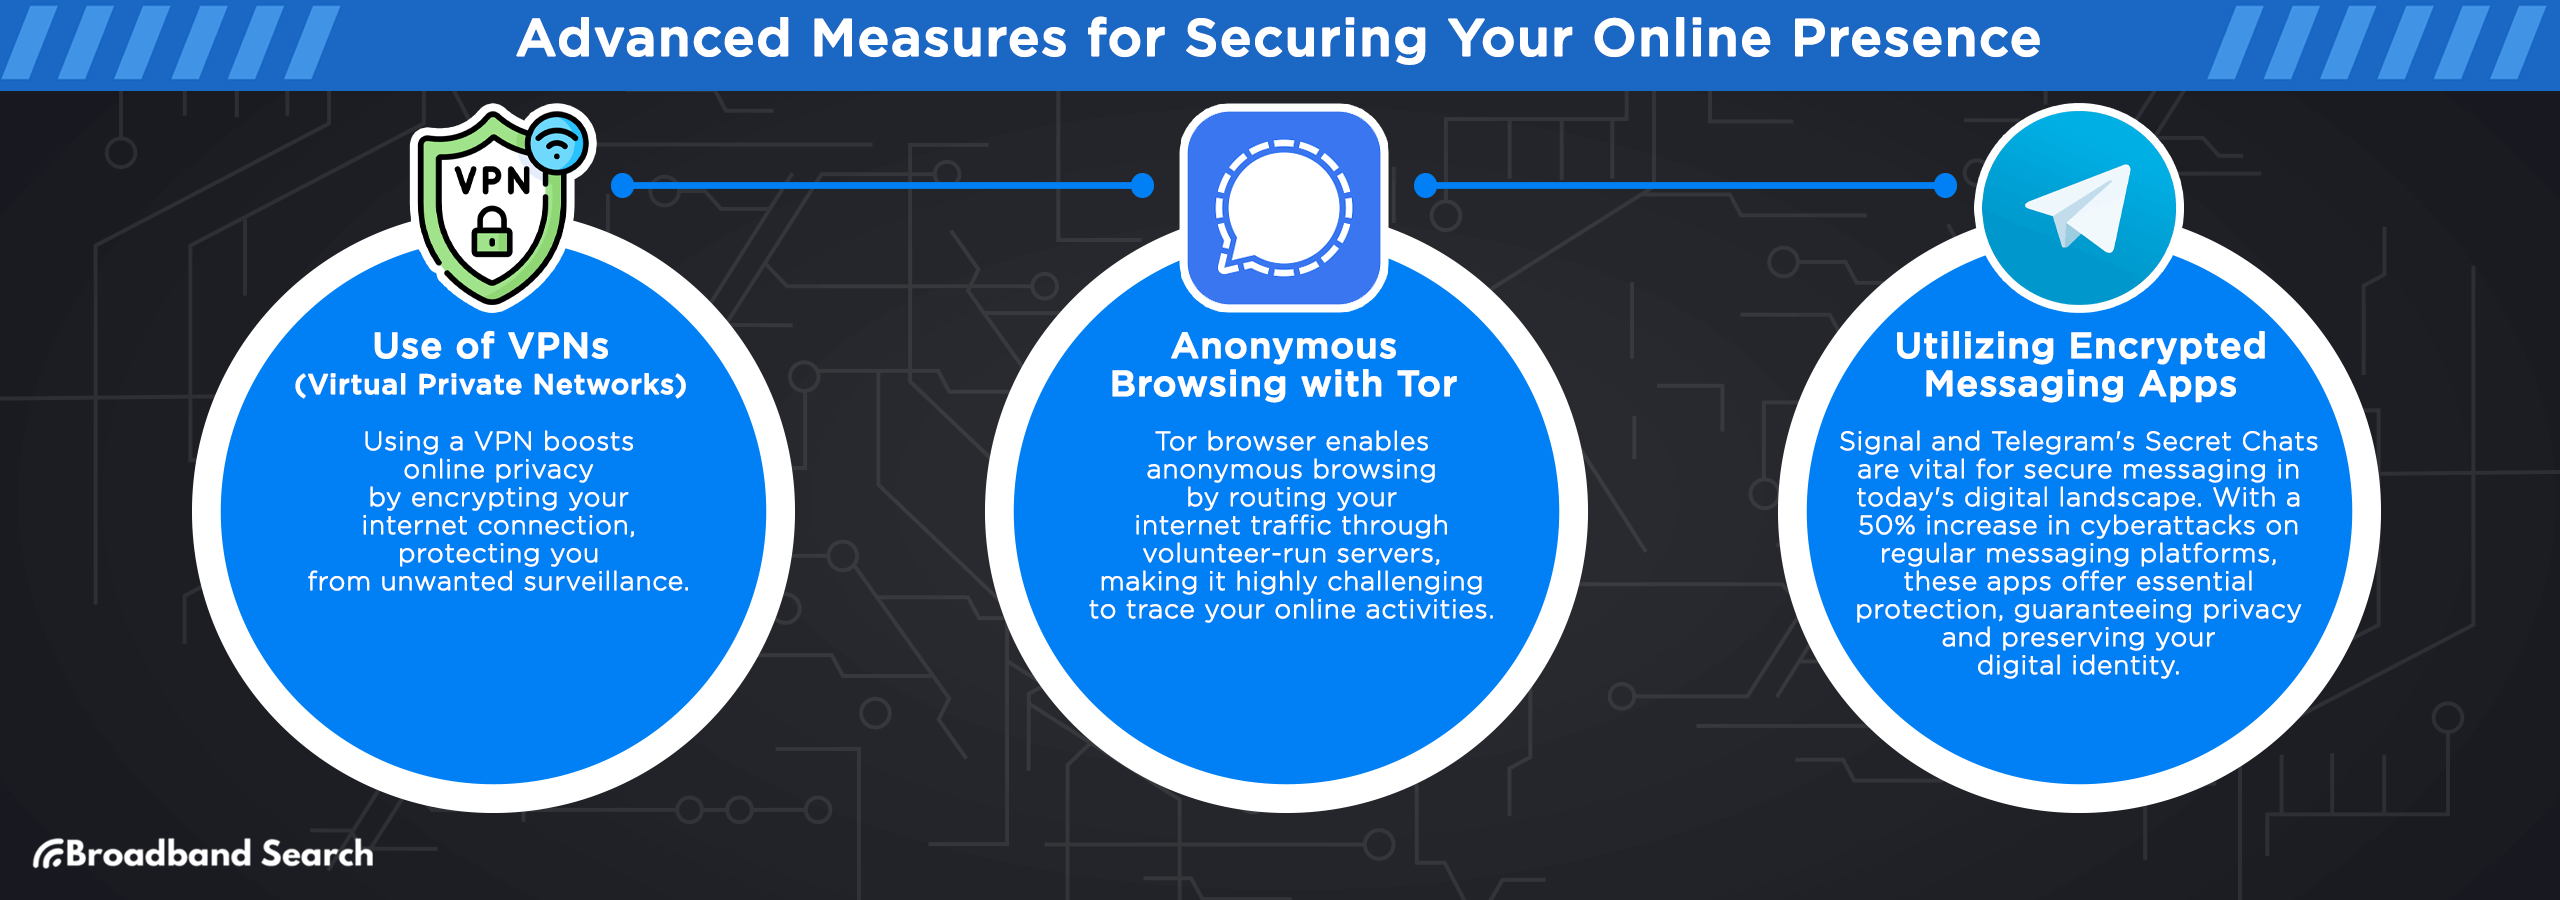 Three advanced measures for securing your online presence